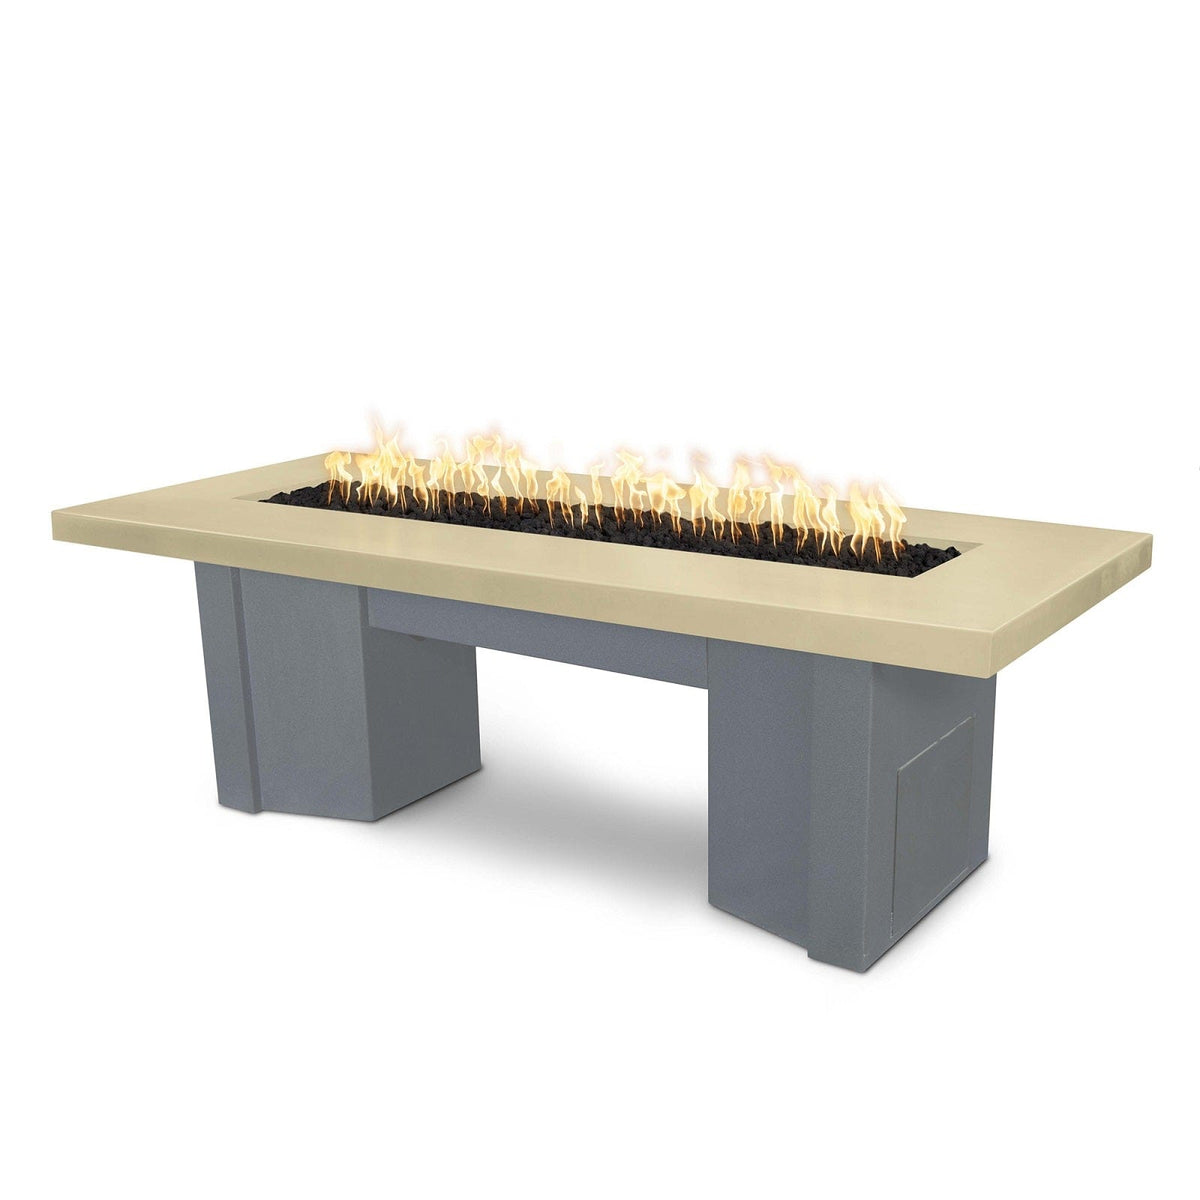 The Outdoor Plus Fire Features Vanilla (-VAN) / Gray Powder Coated Steel (-GRY) The Outdoor Plus 78&quot; Alameda Fire Table Smooth Concrete in Natural Gas - Flame Sense System with Push Button Spark Igniter / OPT-ALMGFRC78FSEN-NG